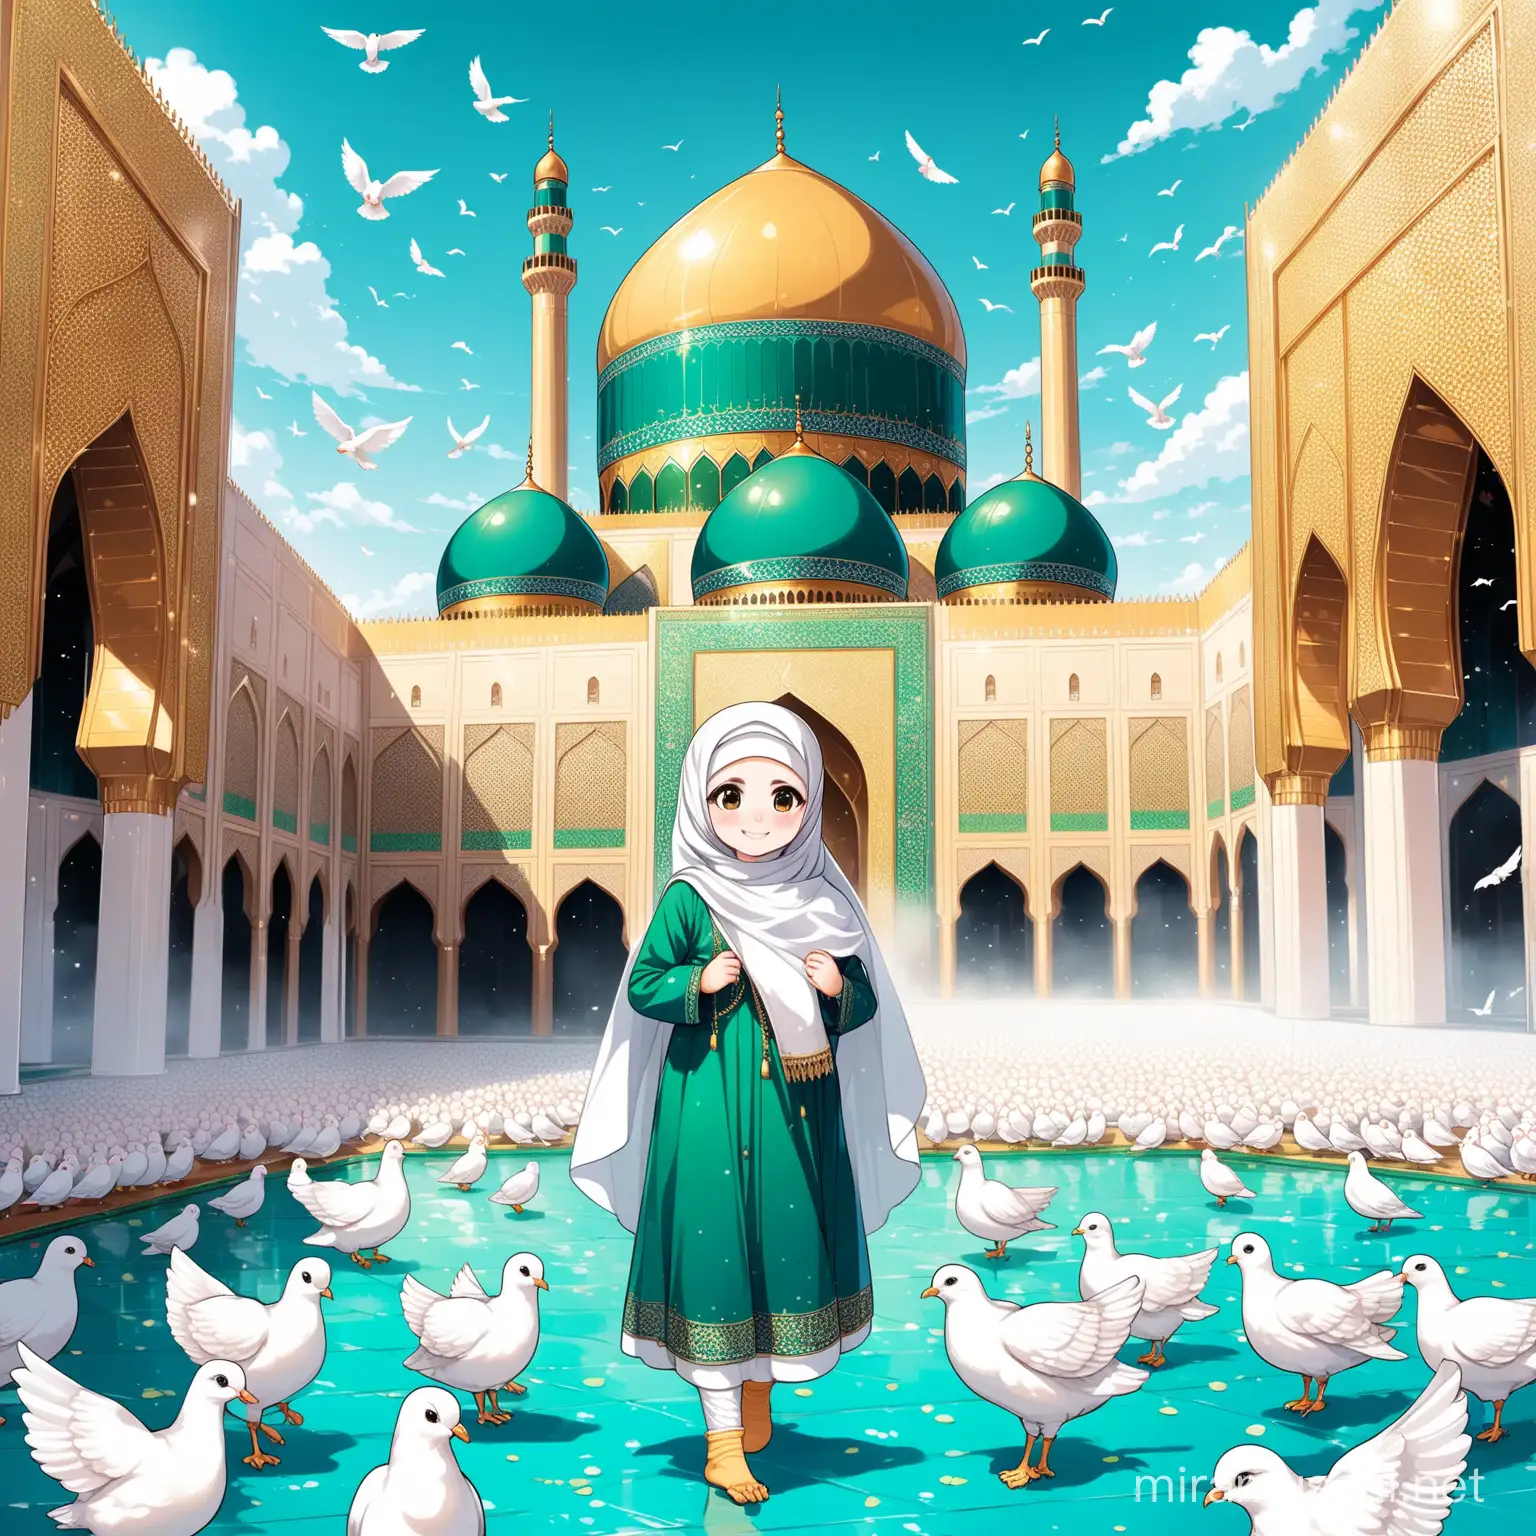 Character Persian little girl(full height, big white flag in hand proudly, Muslim, with emphasis no hair out of veil(Hijab), smaller eyes, bigger nose, white skin, cute, smiling, wearing socks, clothes full of Persian designs).

Atmosphere beautiful shrine of Imam Reza, Yard, pond with geyser, A lot of pigeons, nobody.